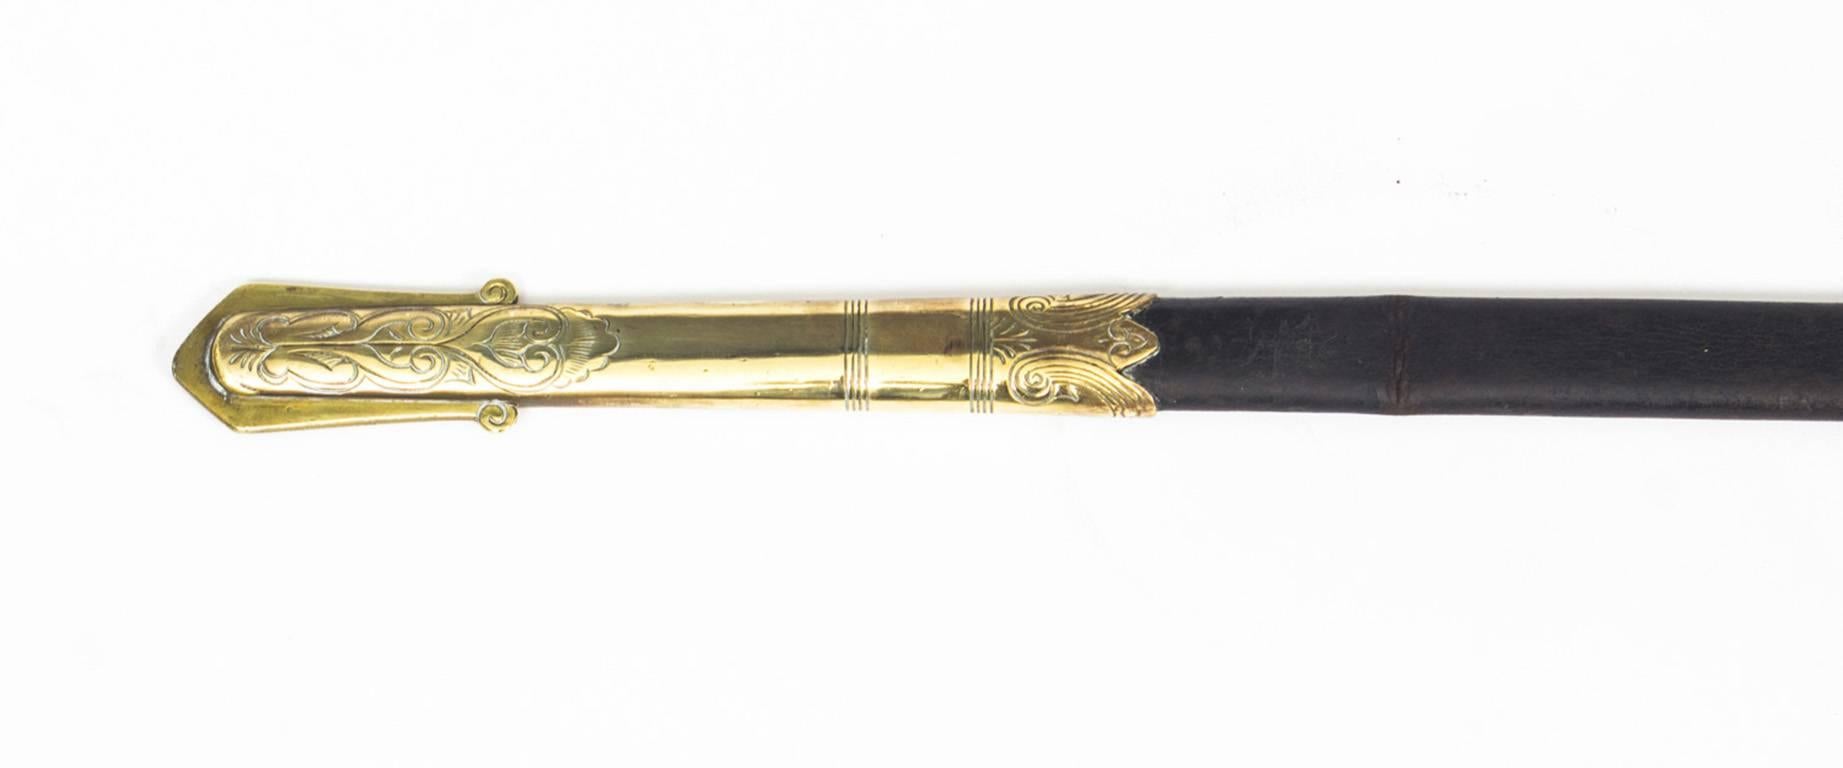 Brass Antique Naval Officers Sword by Wilkinson, Shagreen, circa 1897